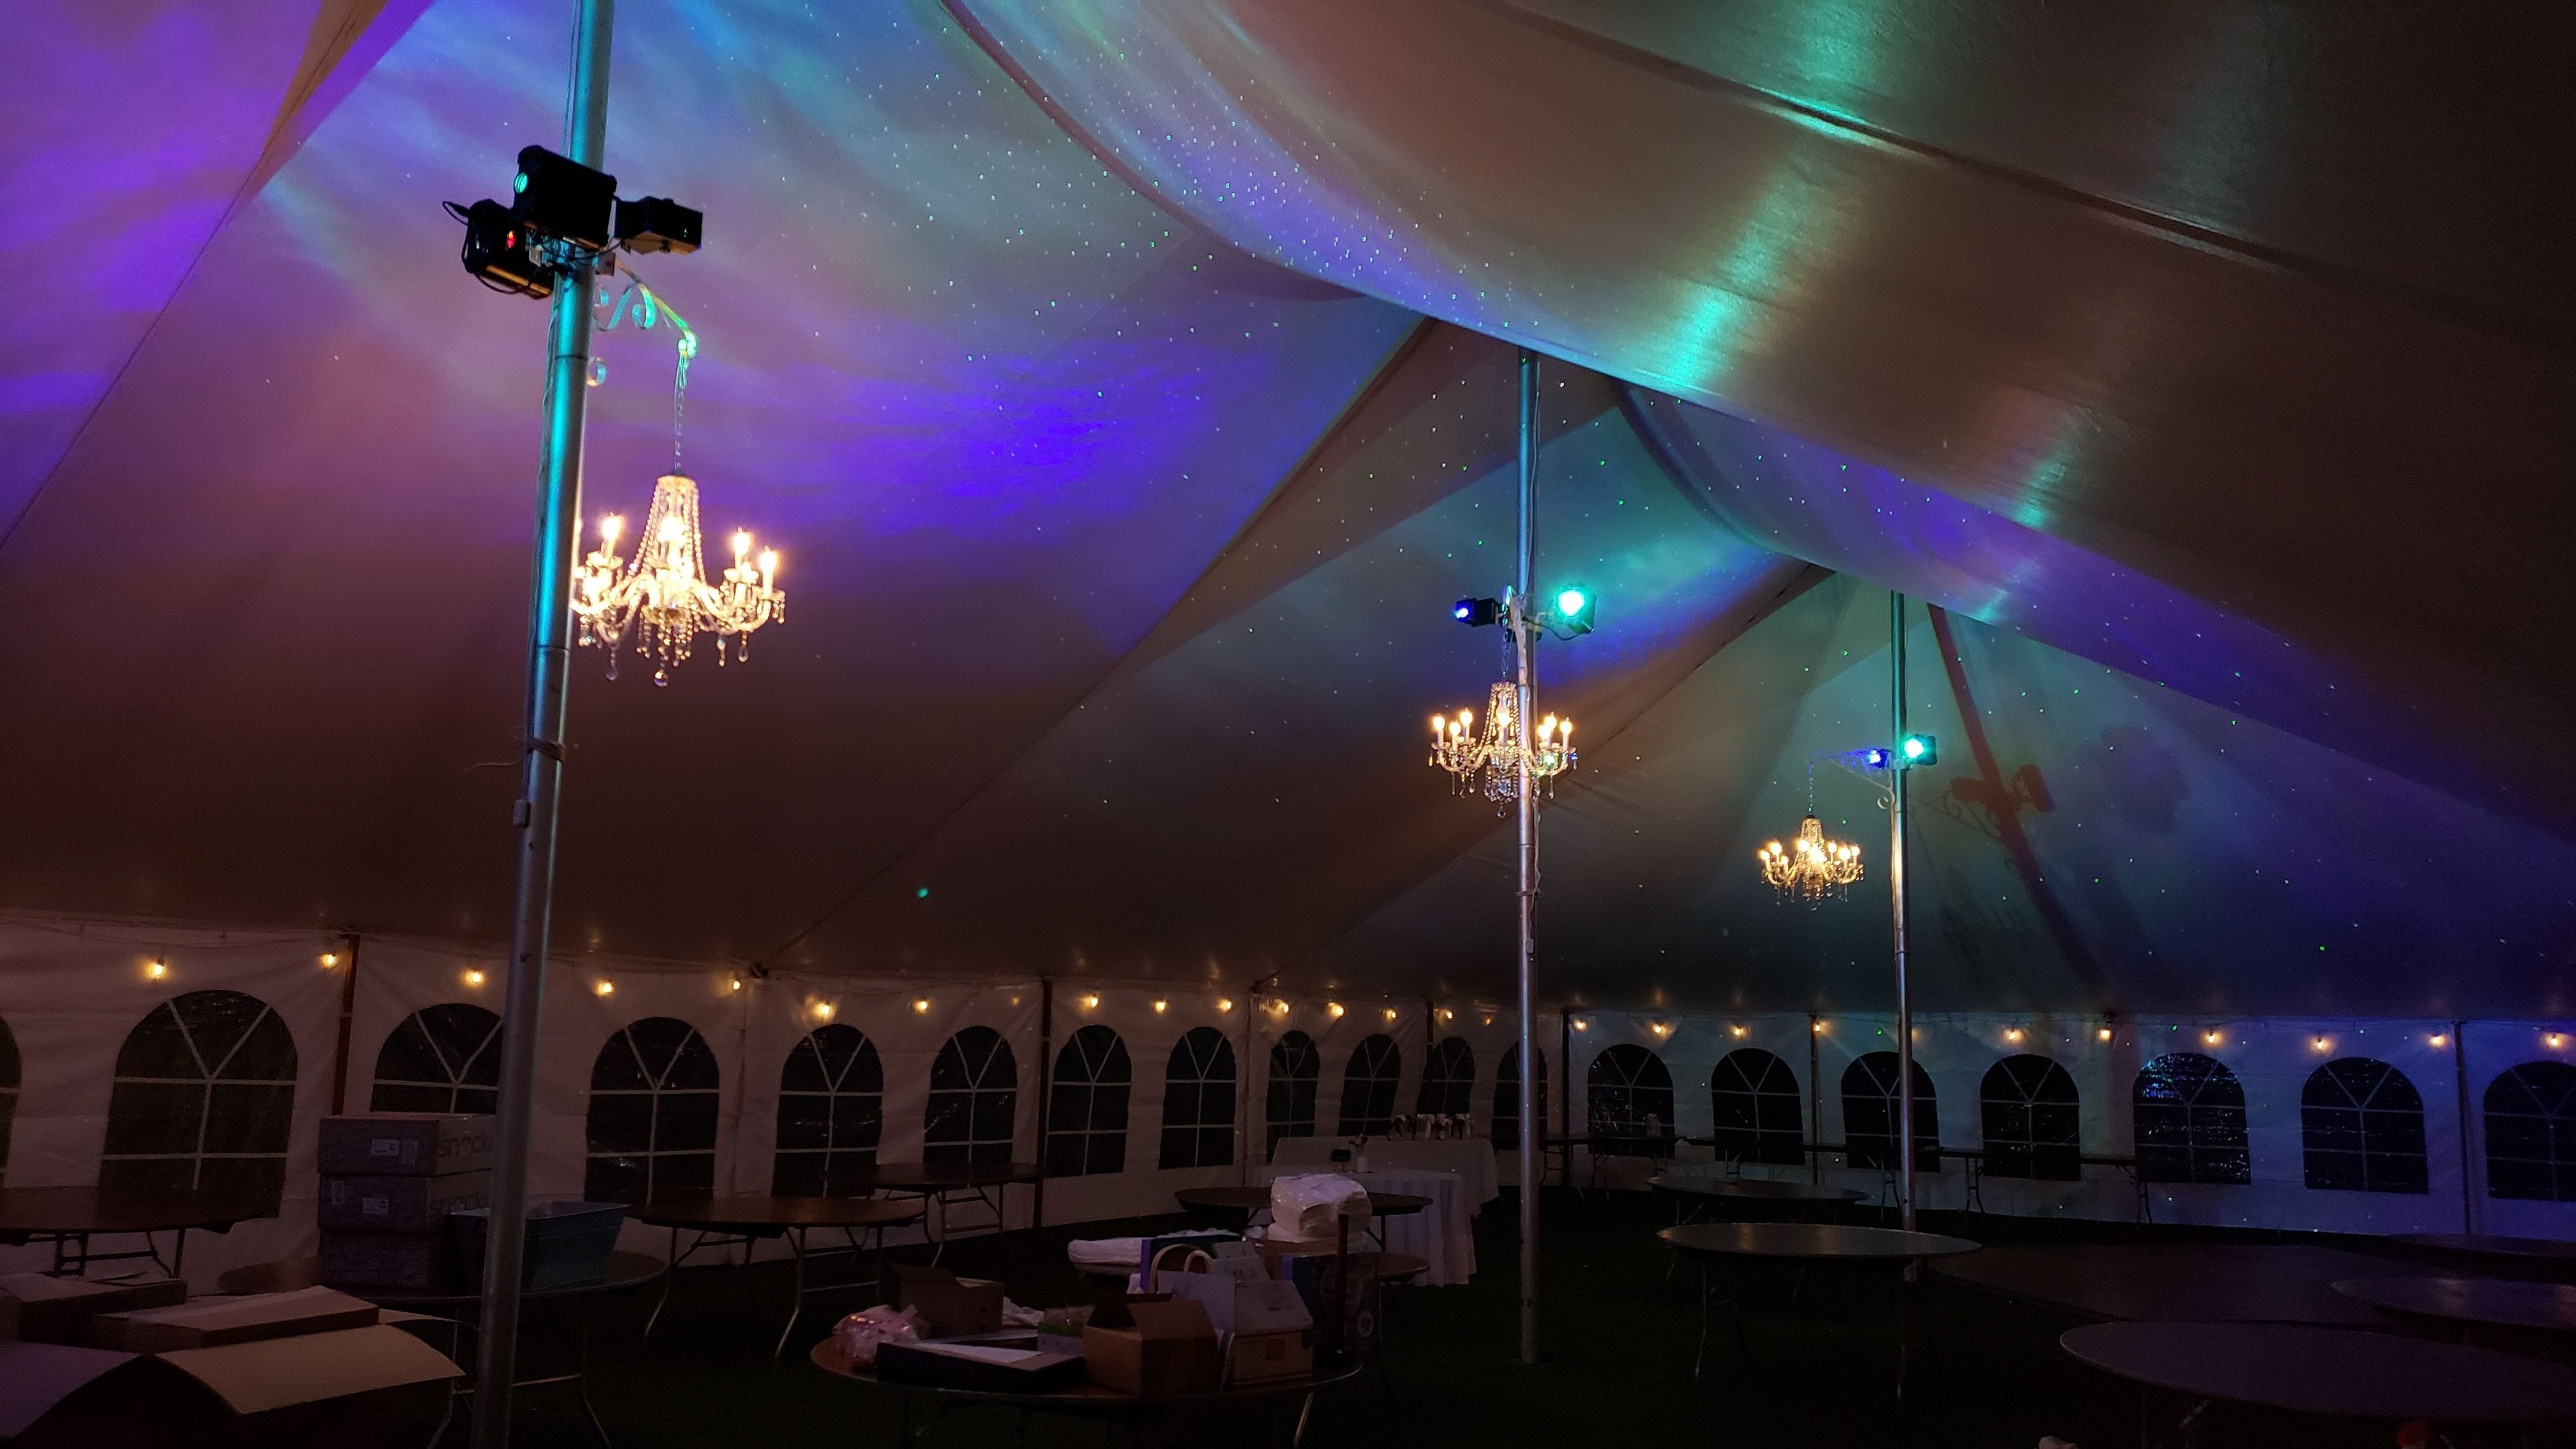 Wedding lighting in a tent with chandeliers, bistro and Northern Lights.